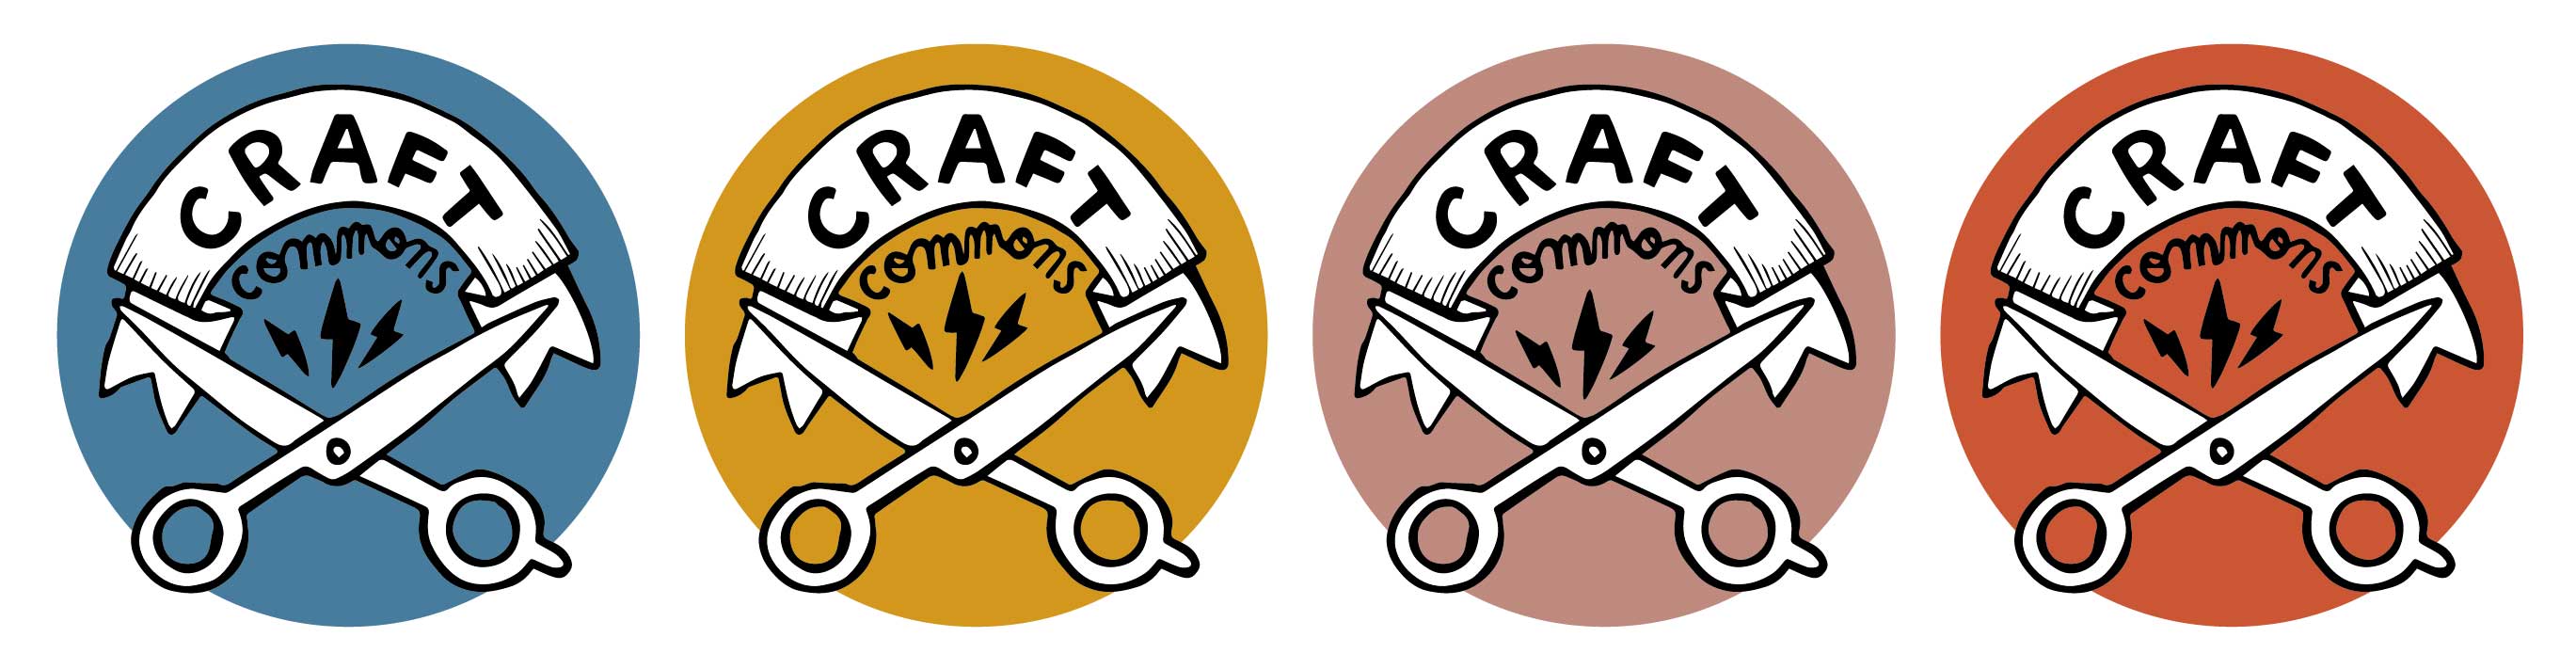 Logo for the Craft Commons project in the various brand colours